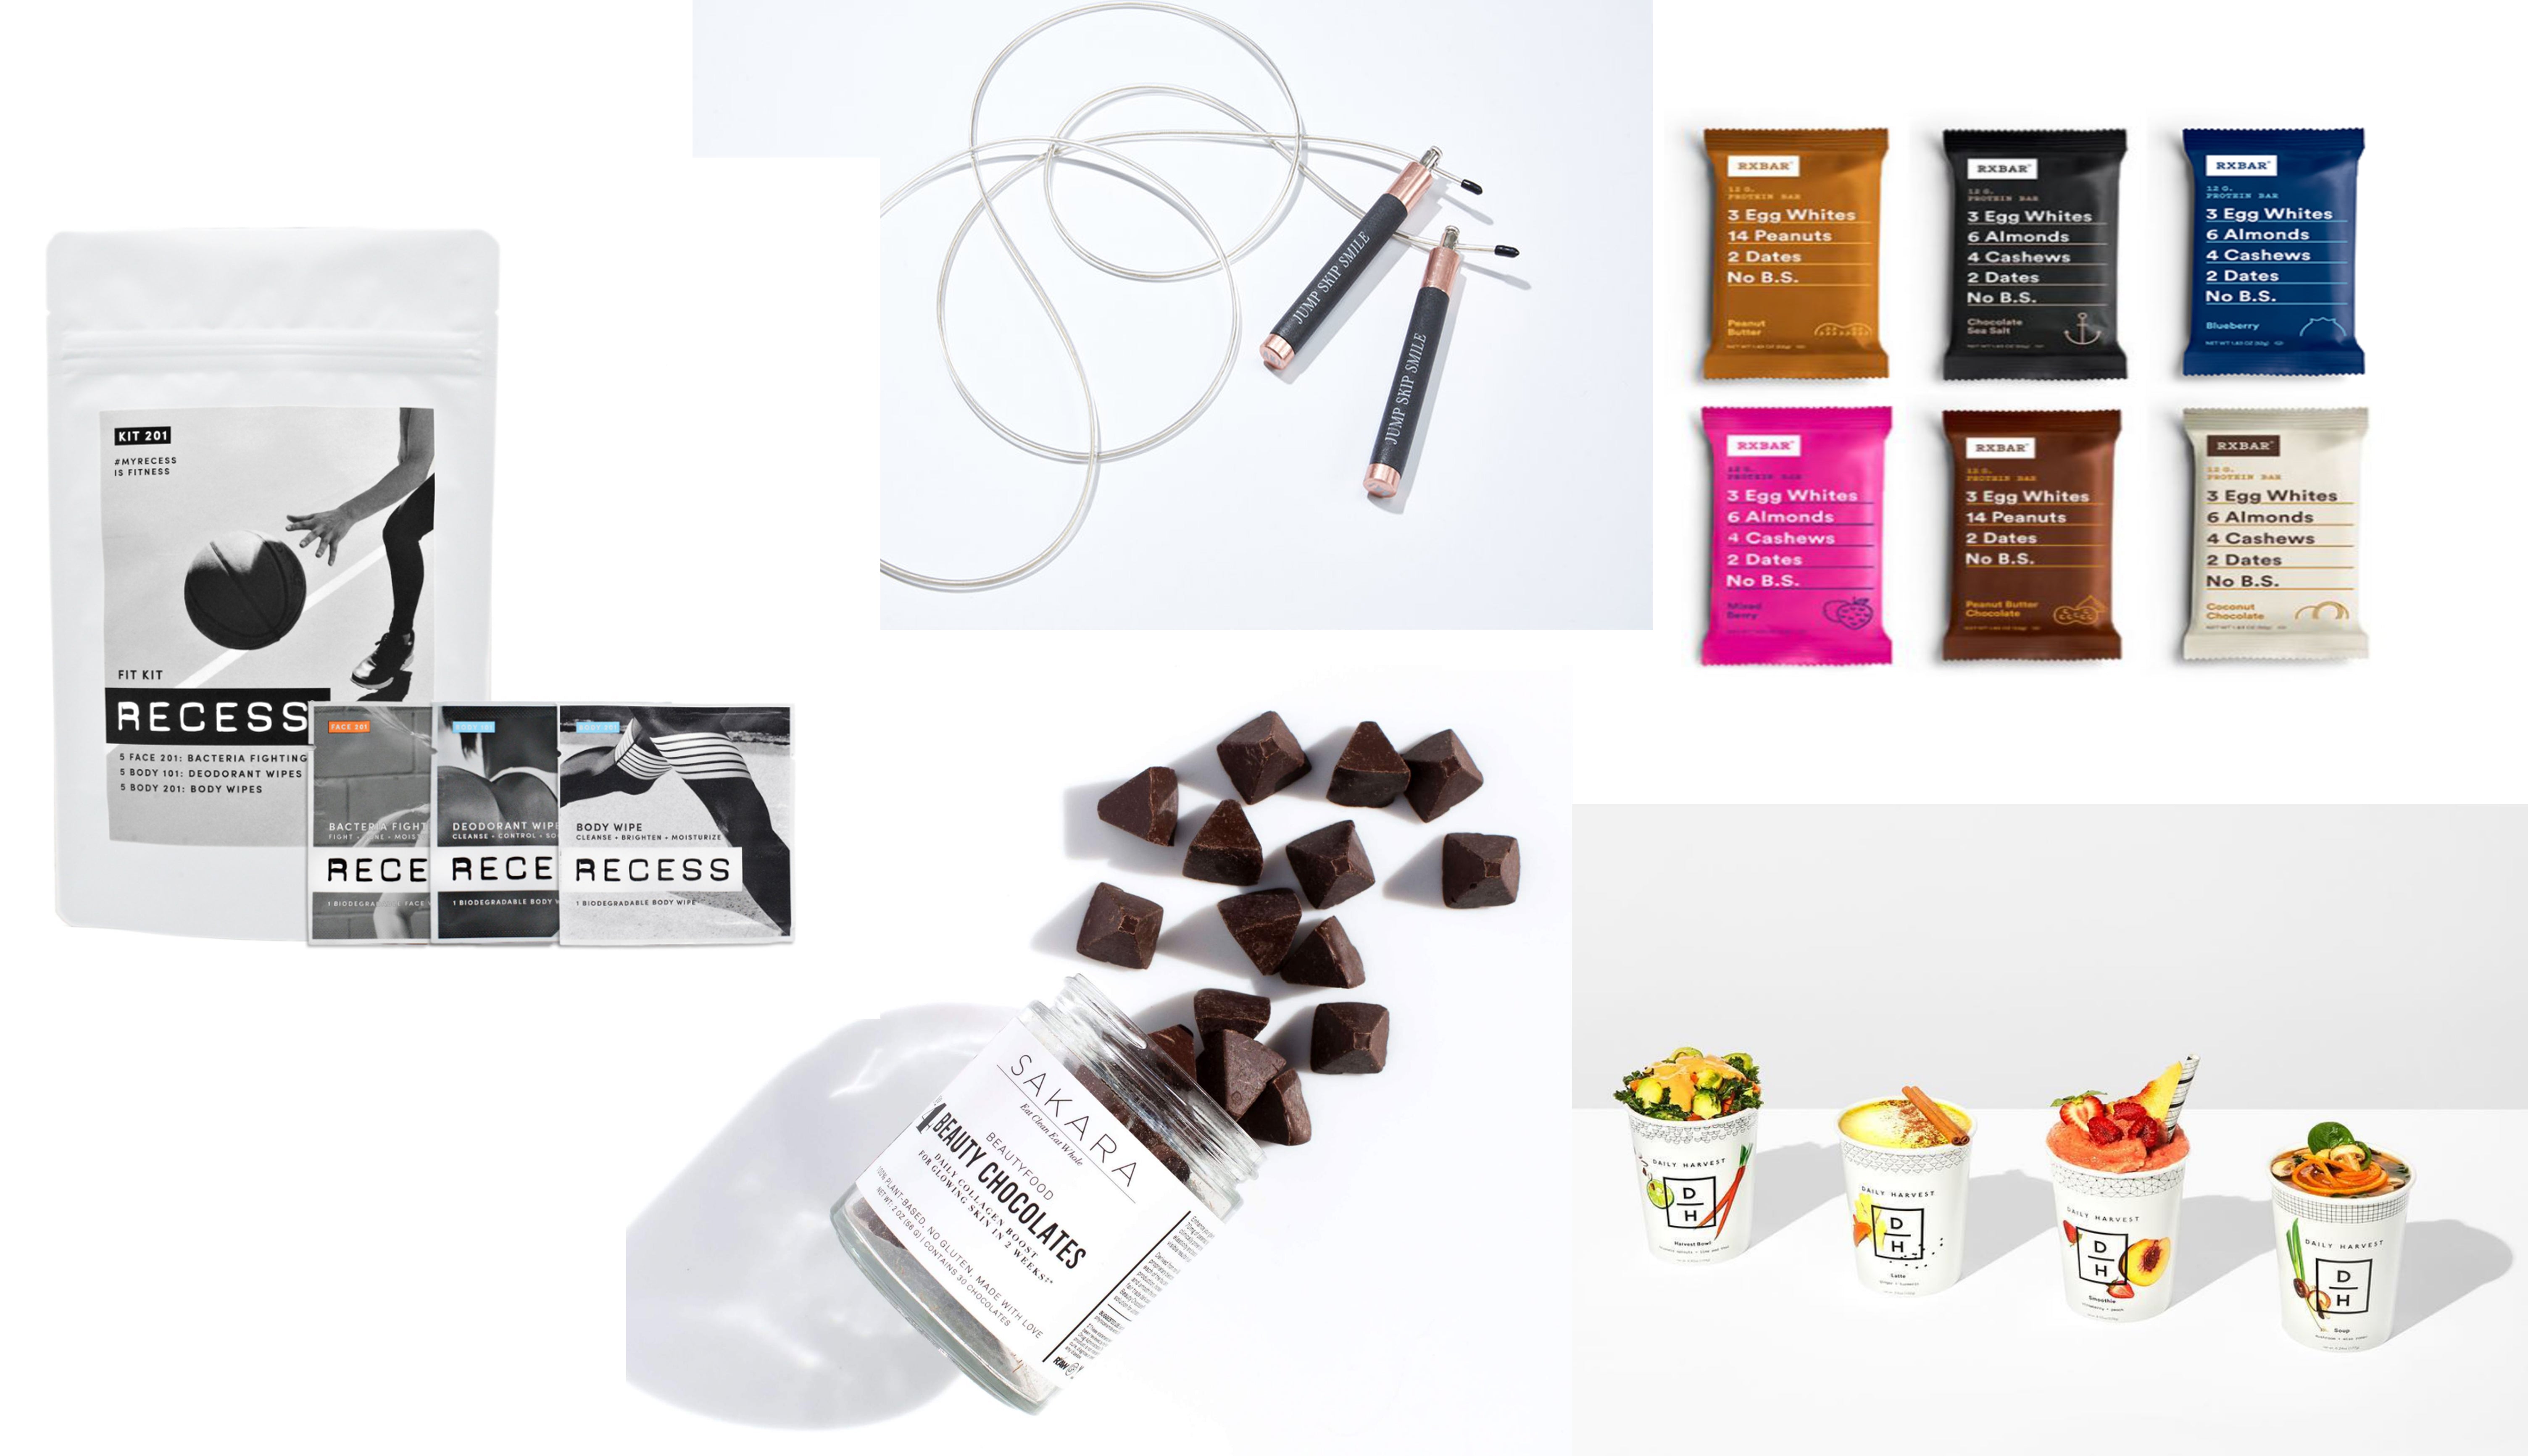 Last minute gifts: 7 Products for the Fitness Enthusiast in Your Life